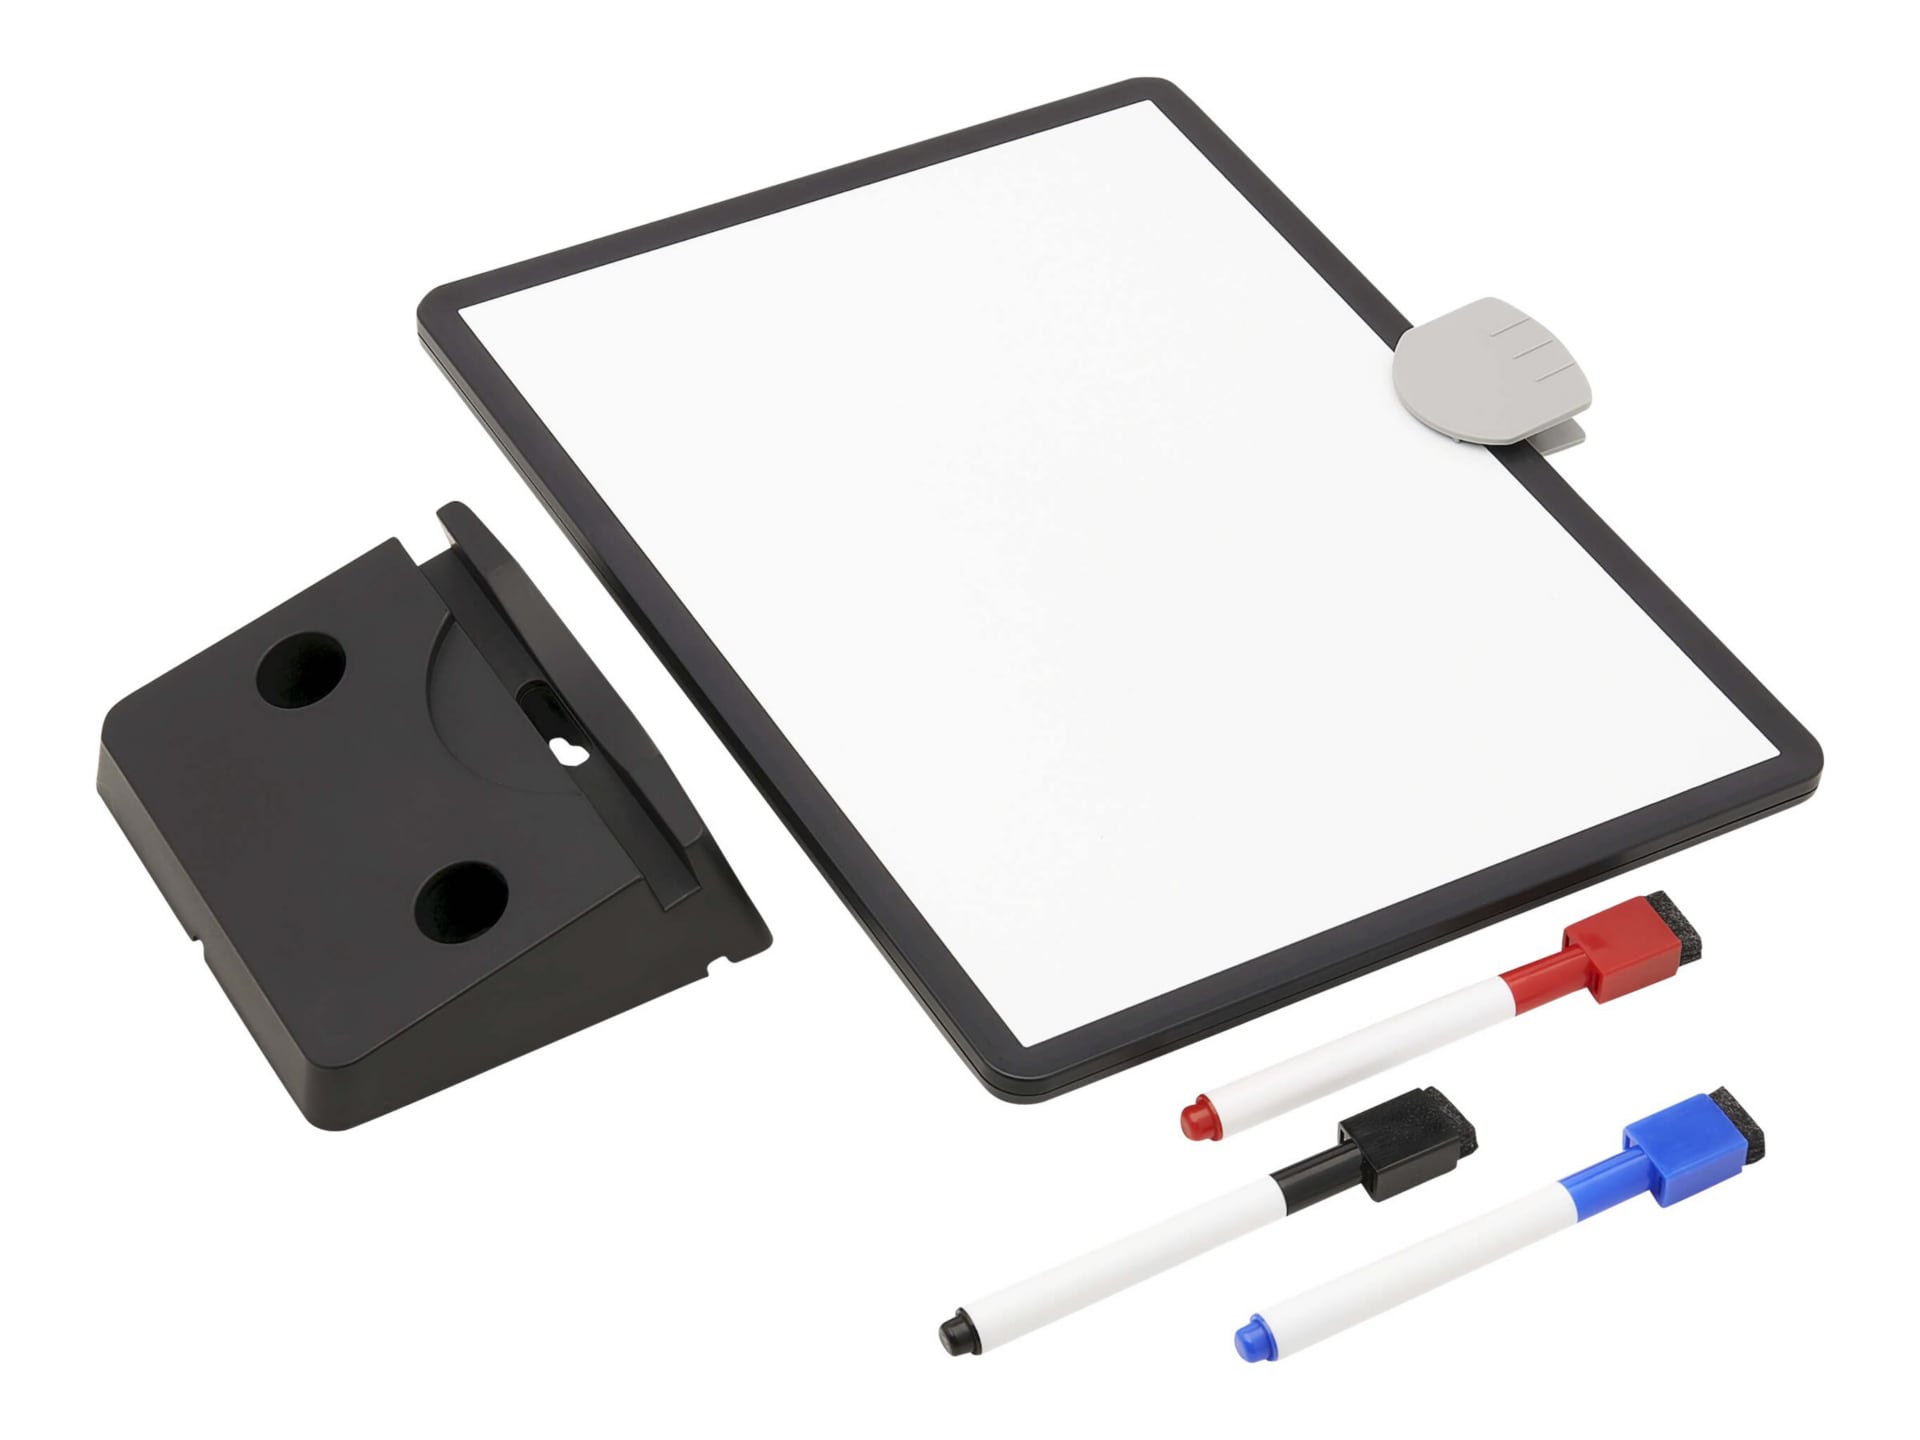 Tripp Lite Magnetic Dry-Erase Whiteboard with Stand - VESA Mount, 3 Markers